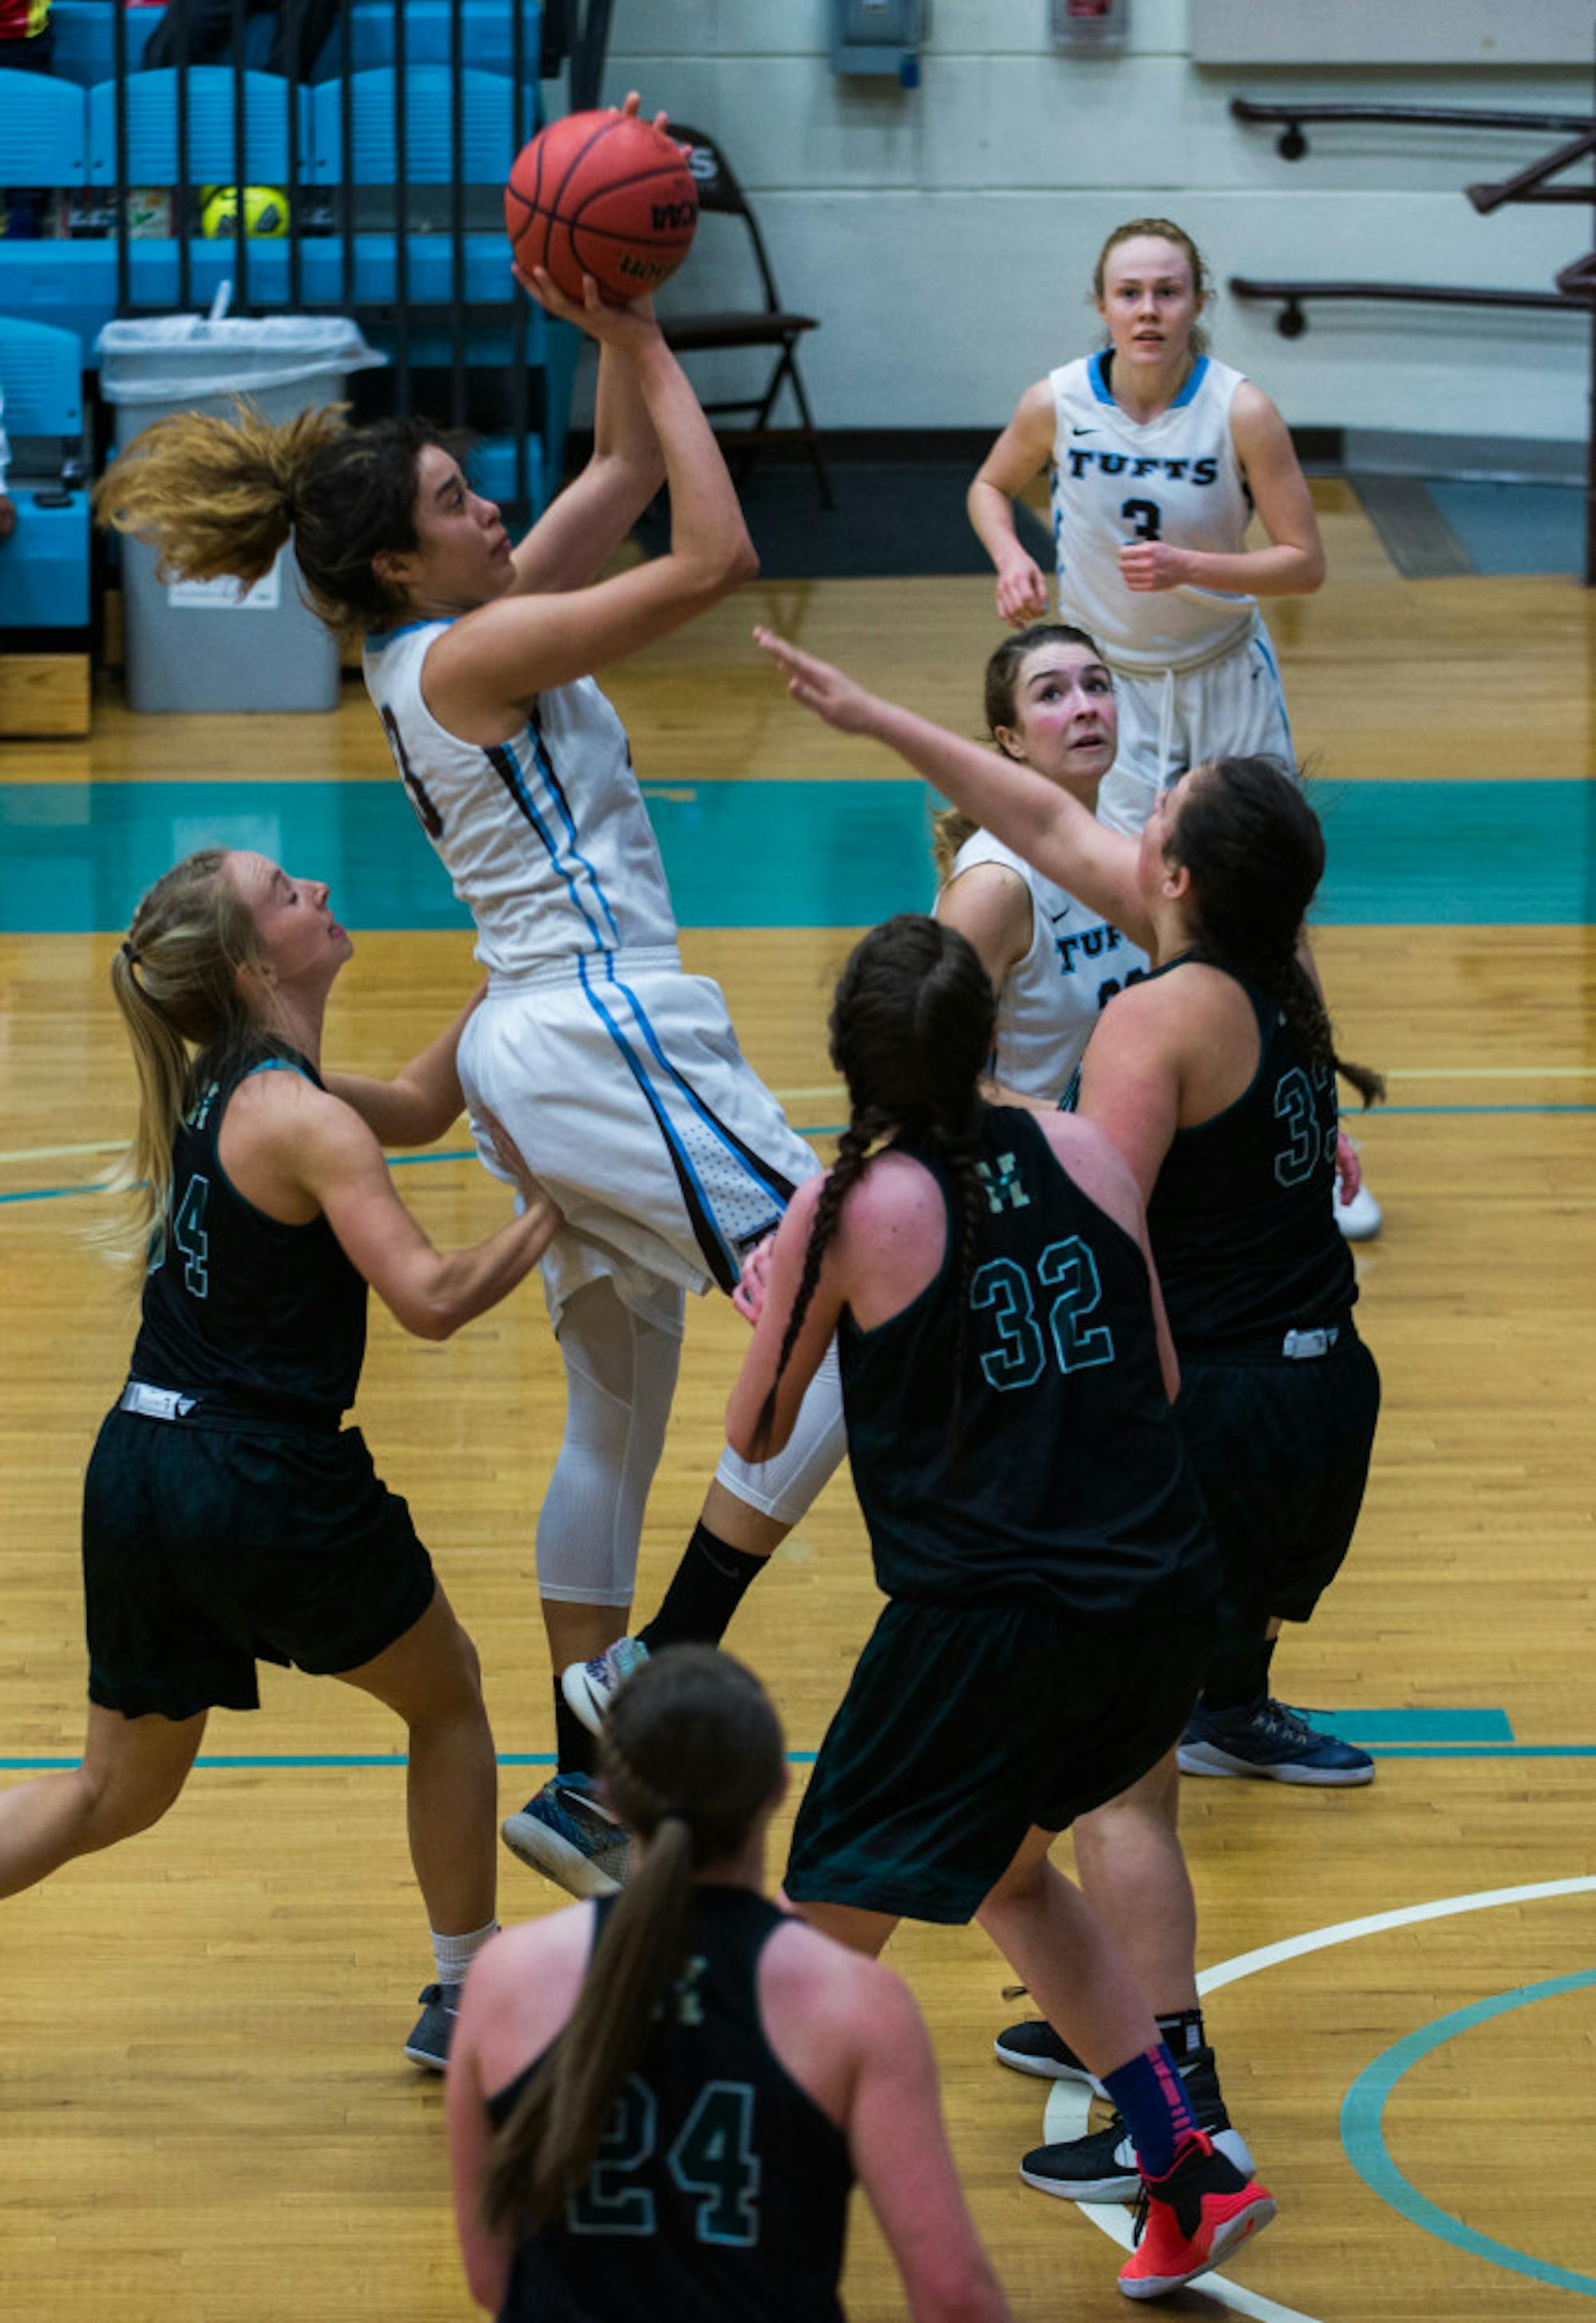 2017-03-04-Womens-Basketball-Tufts-at-Husson-5